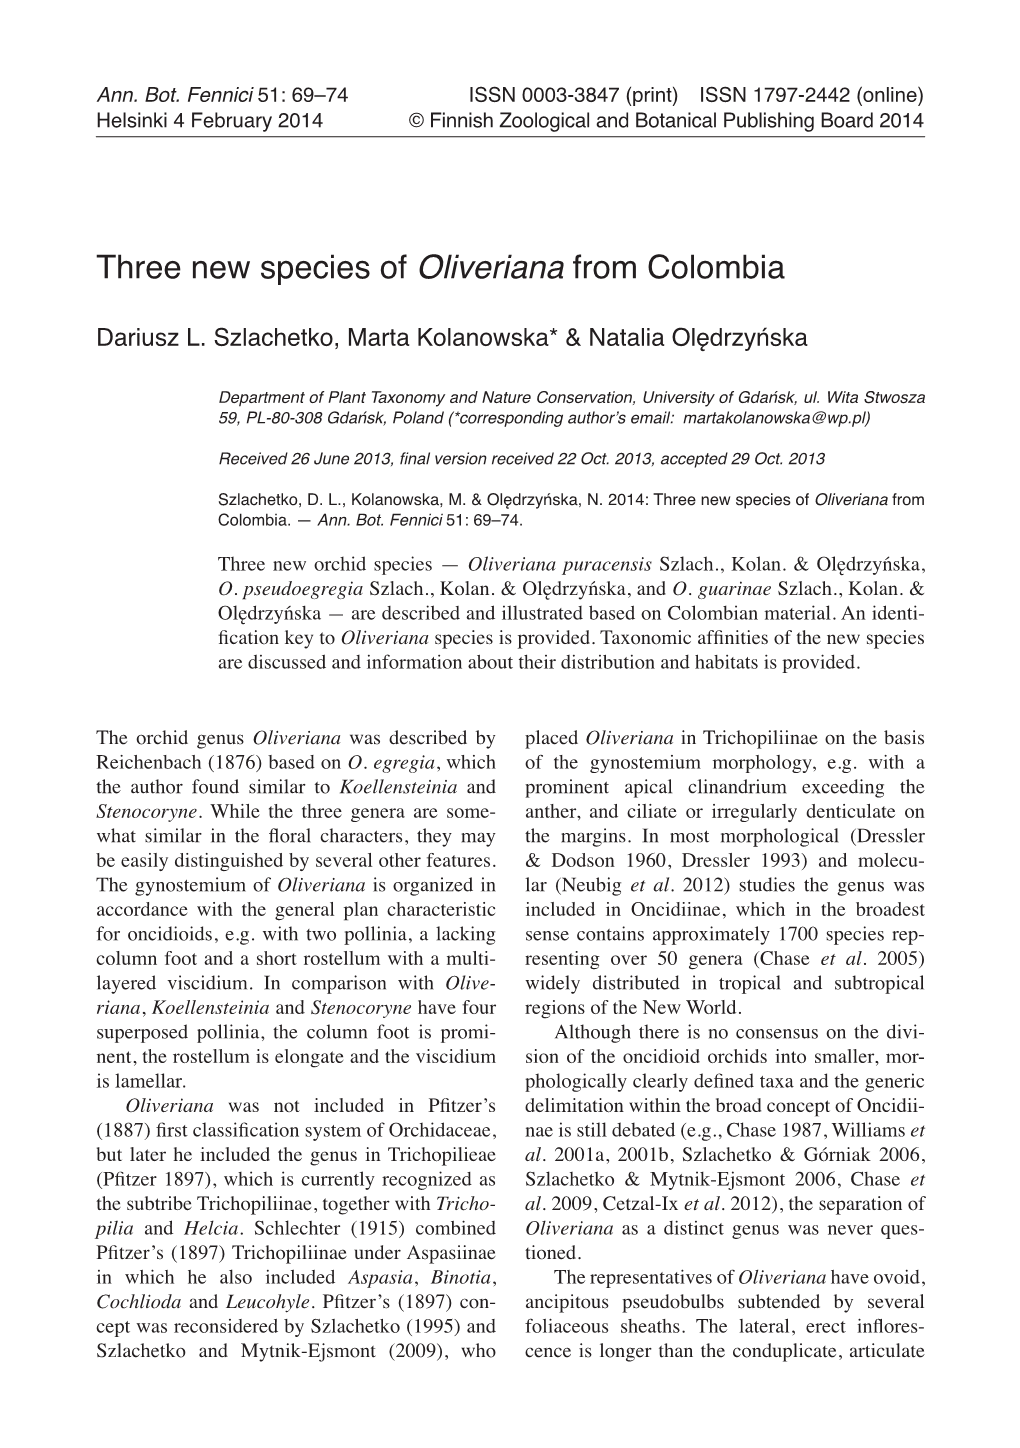 Three New Species of Oliveriana from Colombia